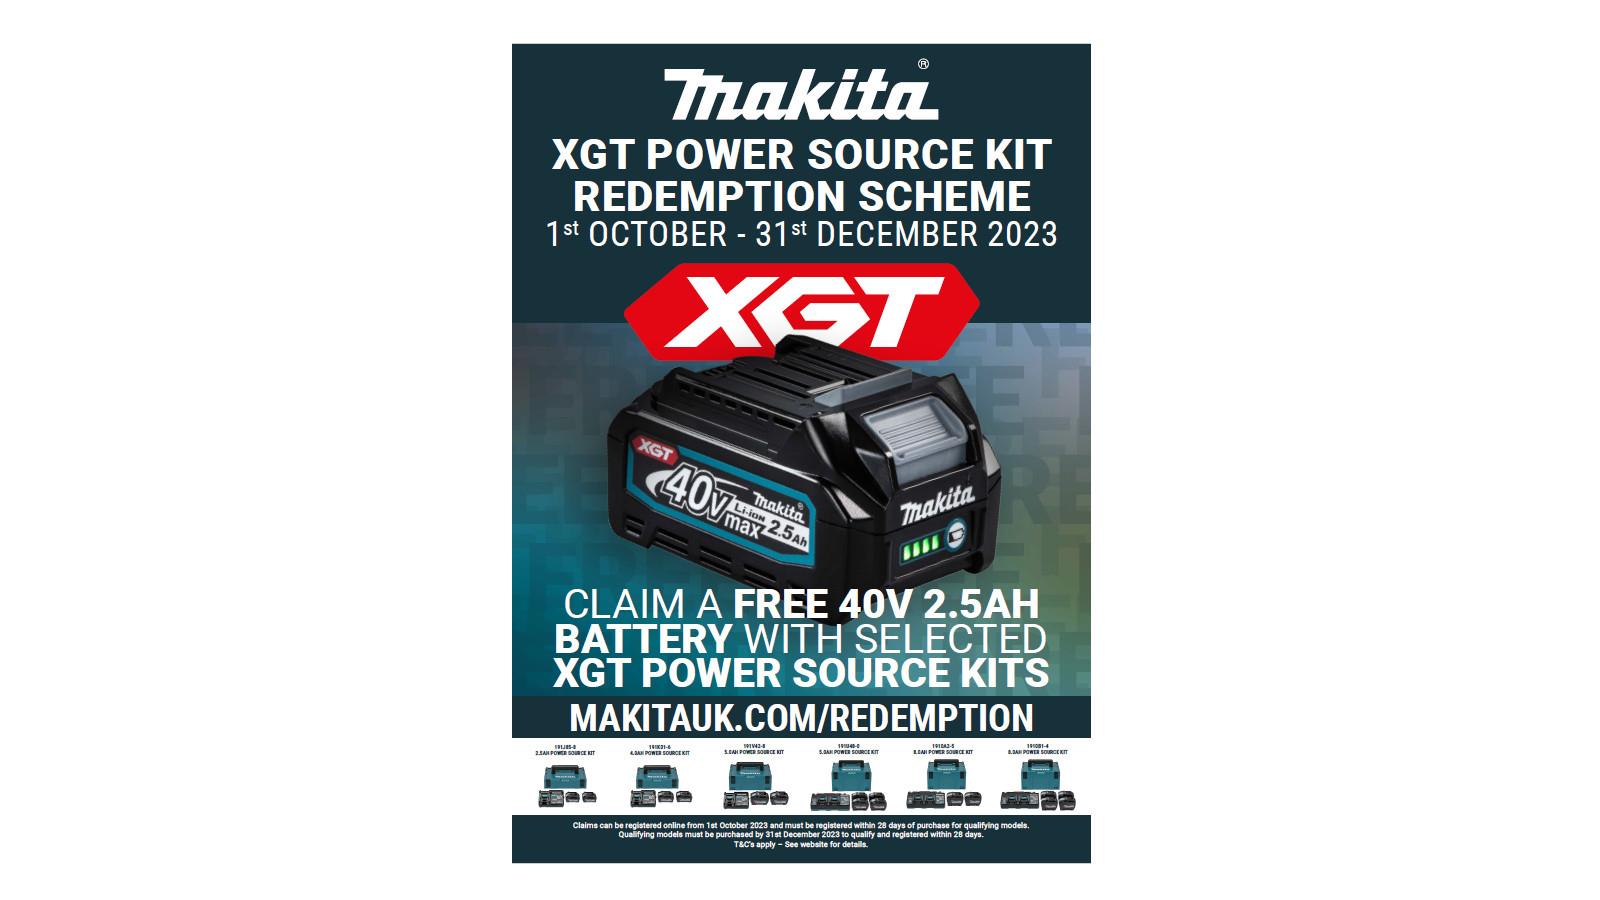 Power Up Your Tools with Makita's latest XGT Power Source Kit Redemption image